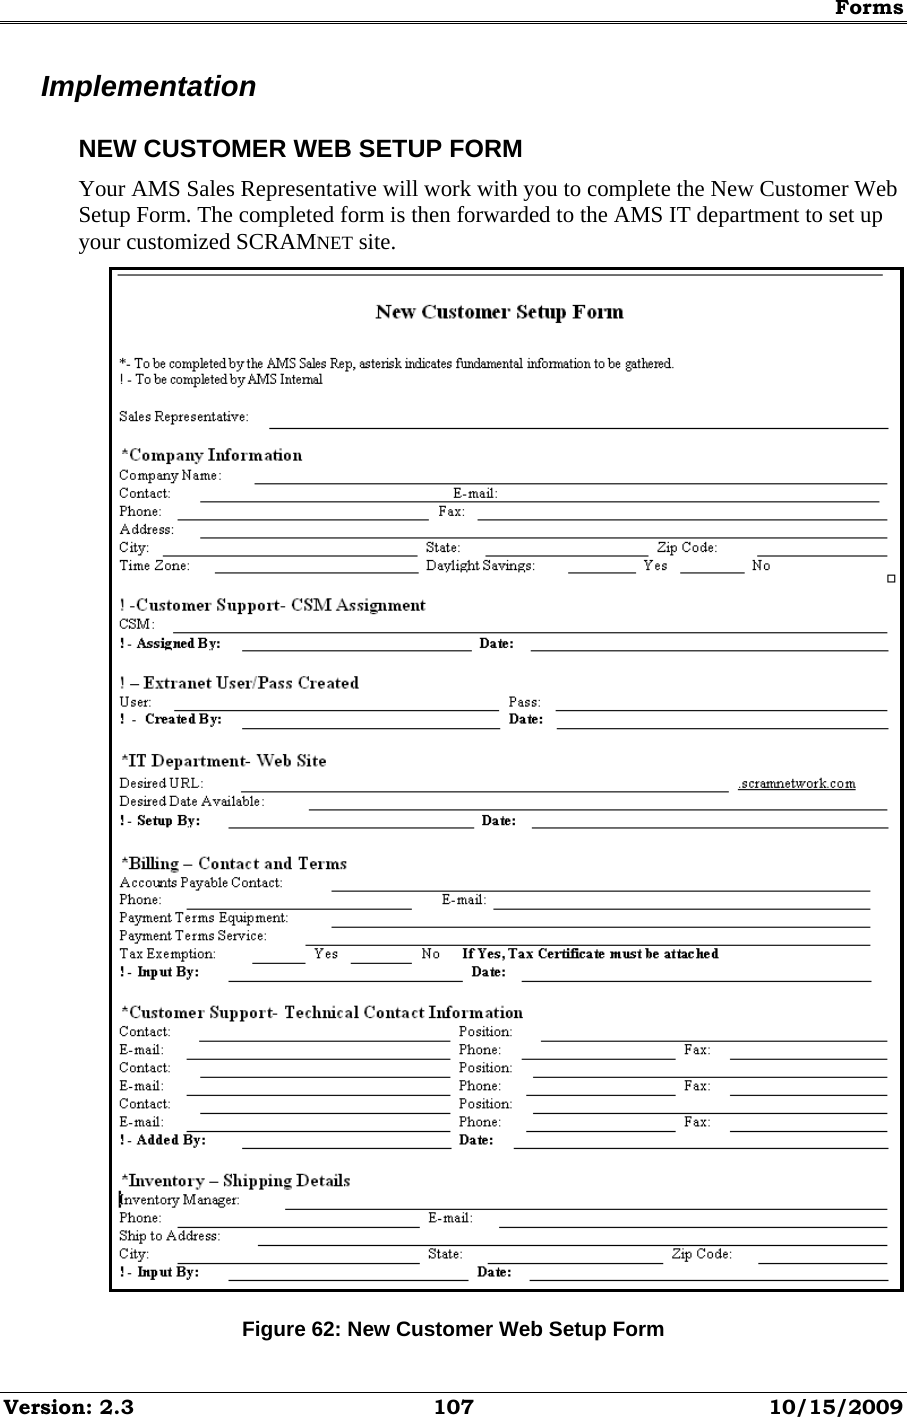 Forms Version: 2.3  107  10/15/2009 Implementation NEW CUSTOMER WEB SETUP FORM Your AMS Sales Representative will work with you to complete the New Customer Web Setup Form. The completed form is then forwarded to the AMS IT department to set up your customized SCRAMNET site.  Figure 62: New Customer Web Setup Form 